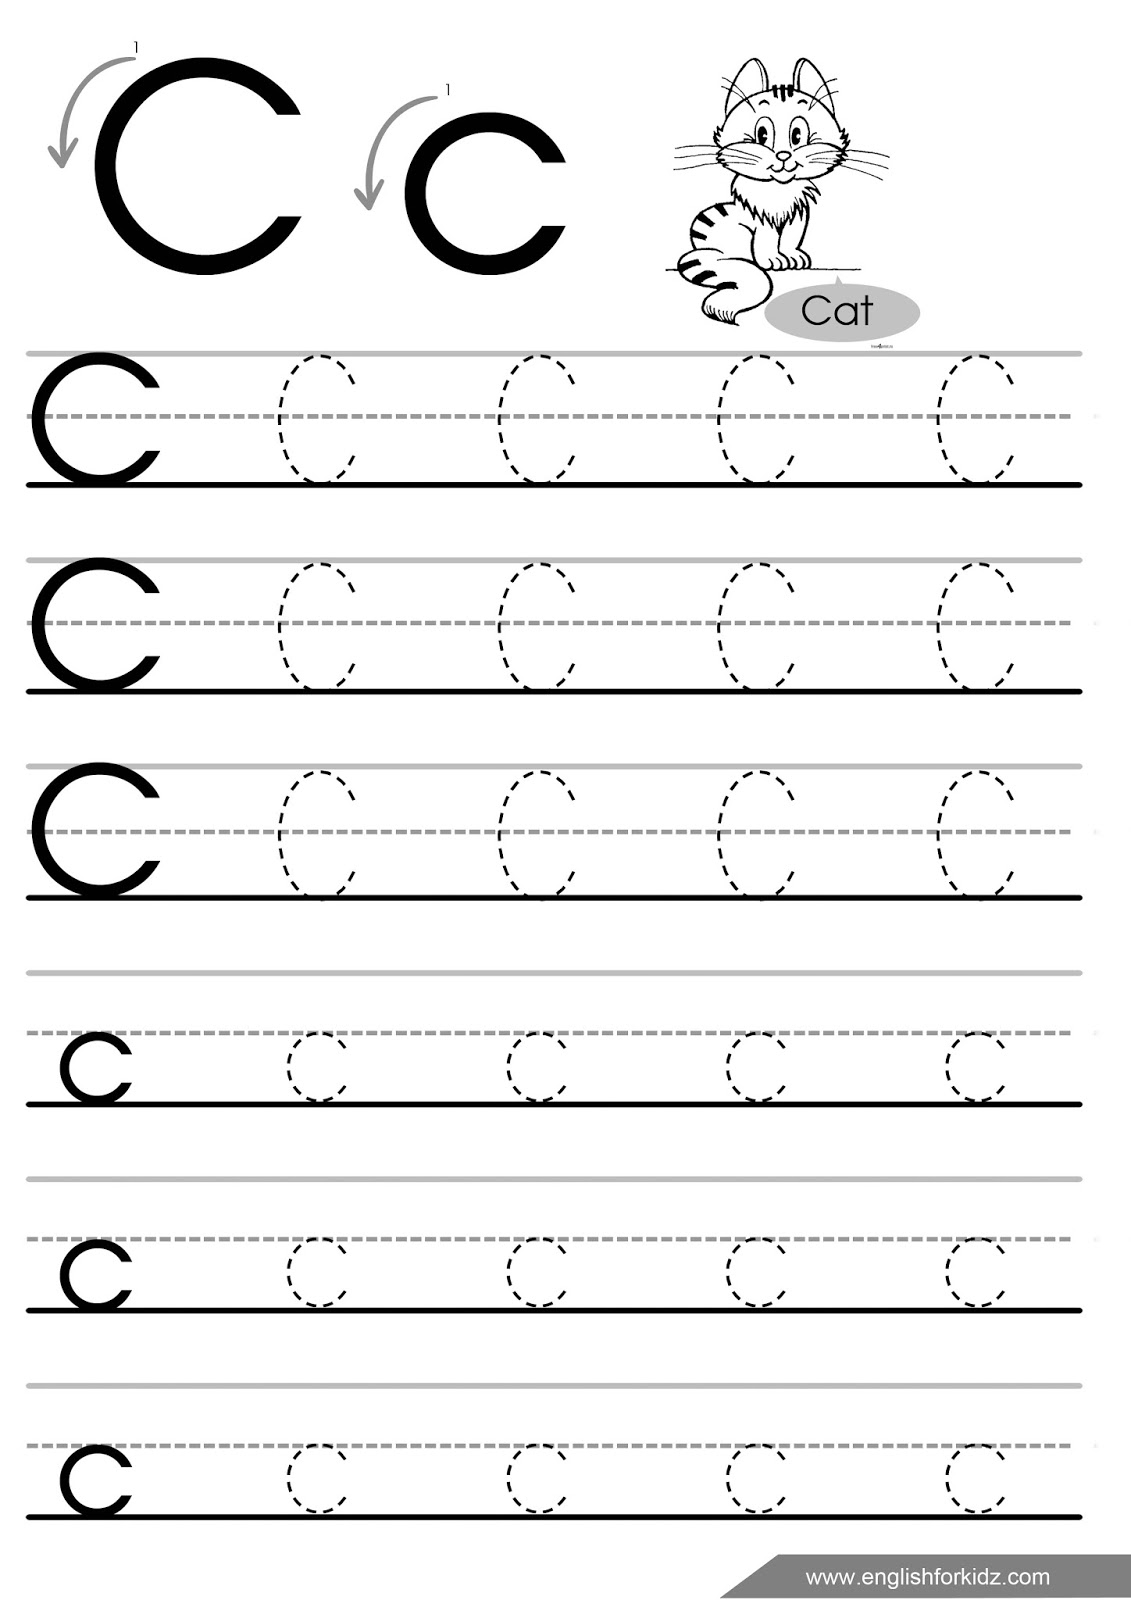 Letter Tracing Worksheets Letters Trace The Worksheet Free regarding Letter C Worksheets Tracing